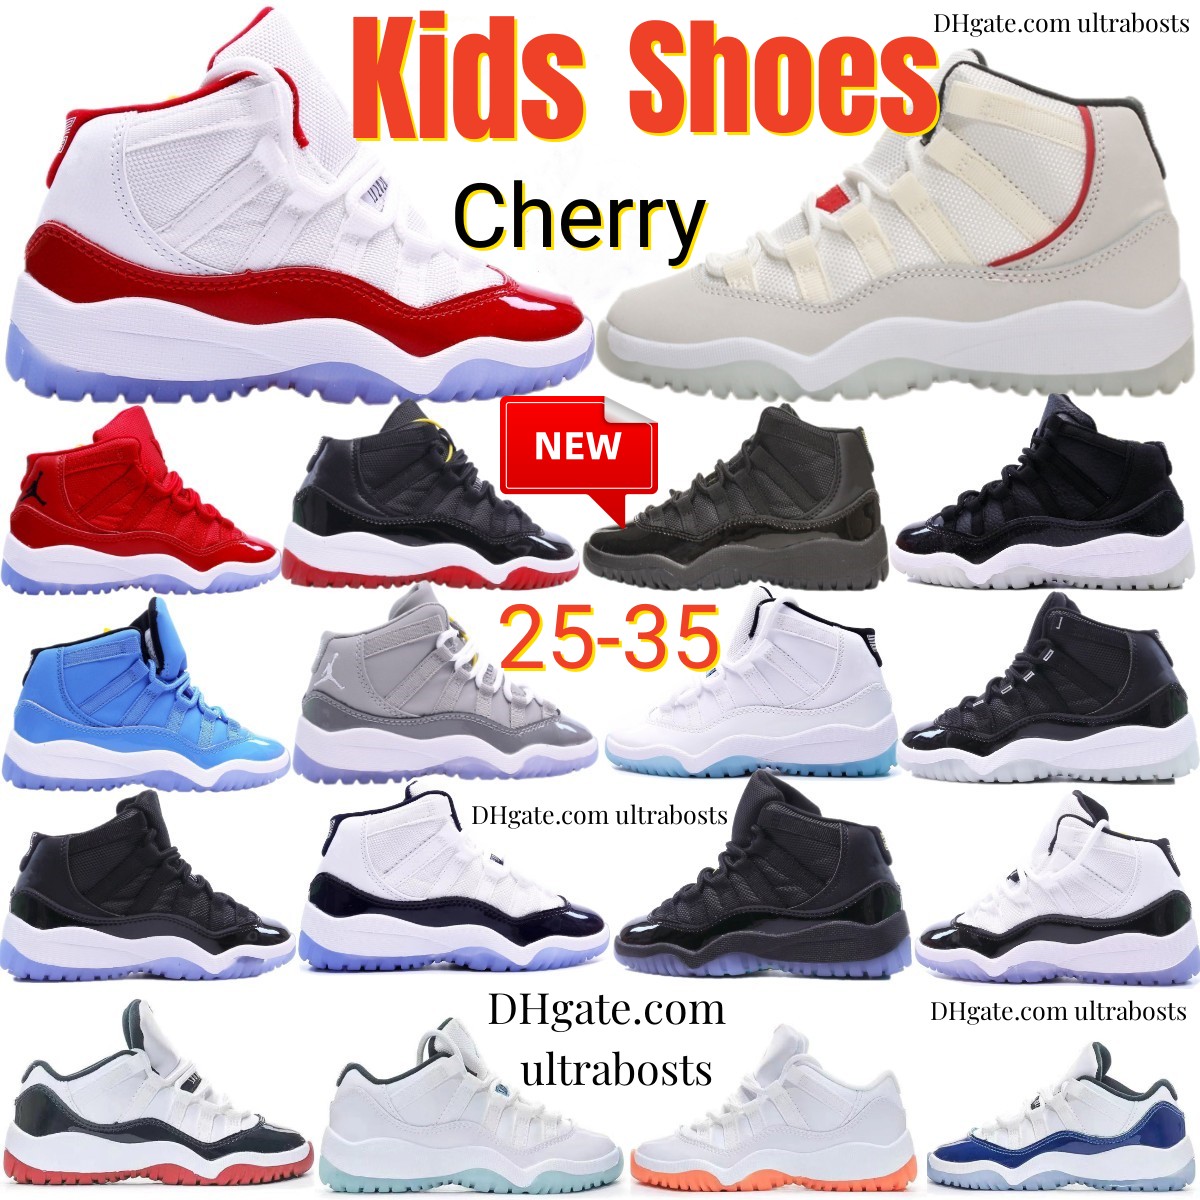 Kids Shoes 11s Cherry Basketball 11 Boys Sneakers Girls XI Children Bred DMP Trainers Toddler Youth Kid Platinum Tint Shoe Cool Grey Legend Blue Sneaker size eur 25-35